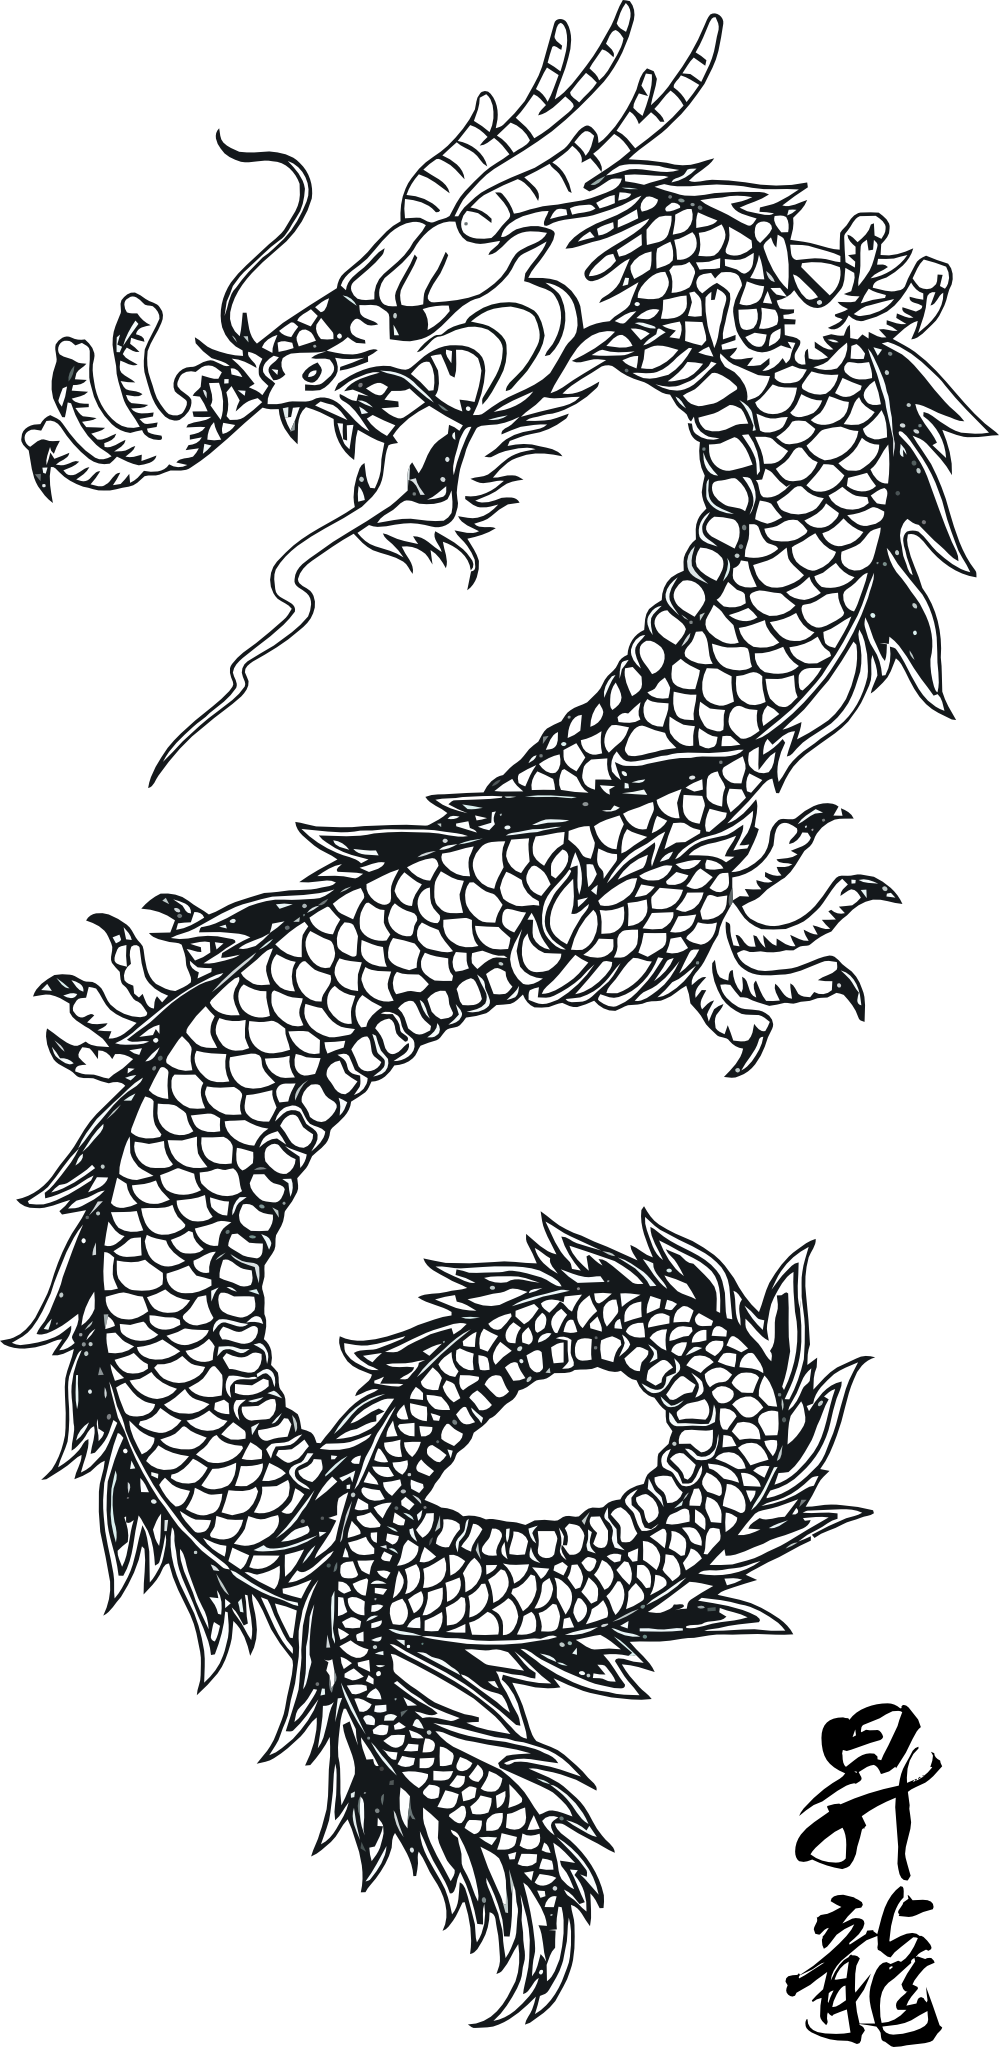 Black tattoo dragon PNG images